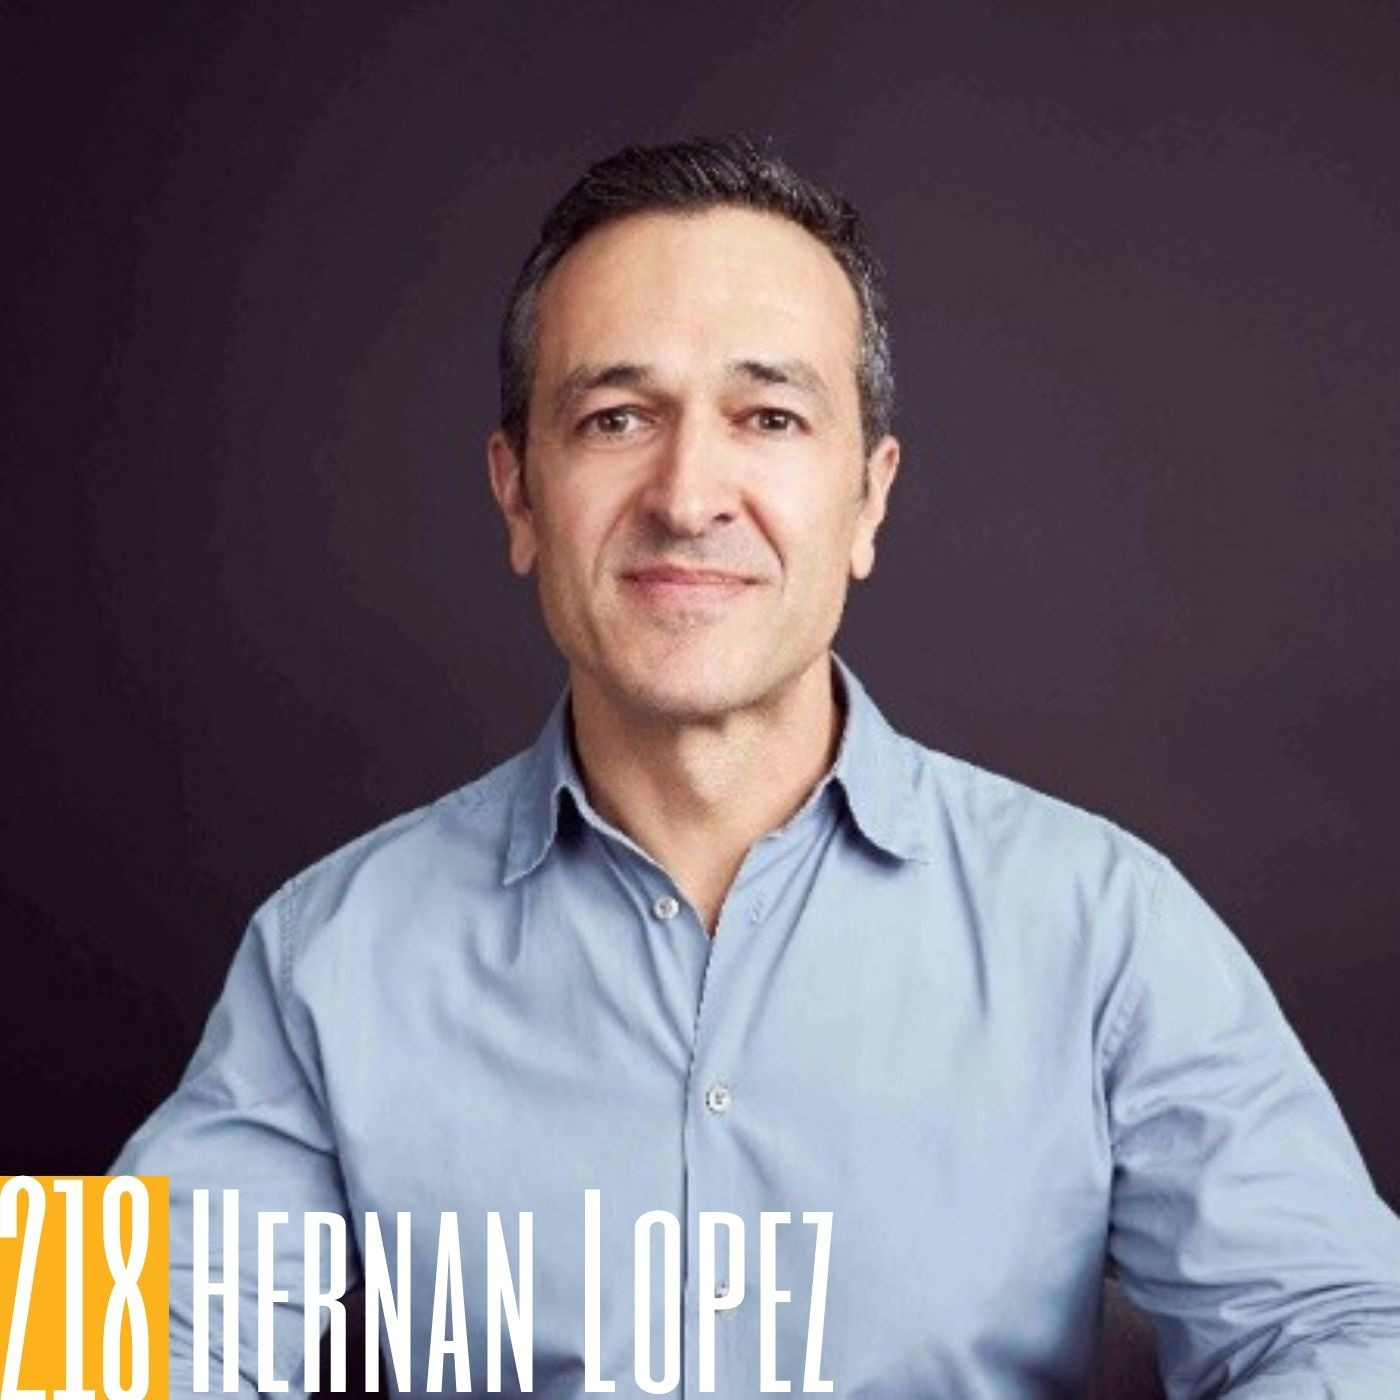 218 Hernan Lopez - Podcasting in a Post COVID World